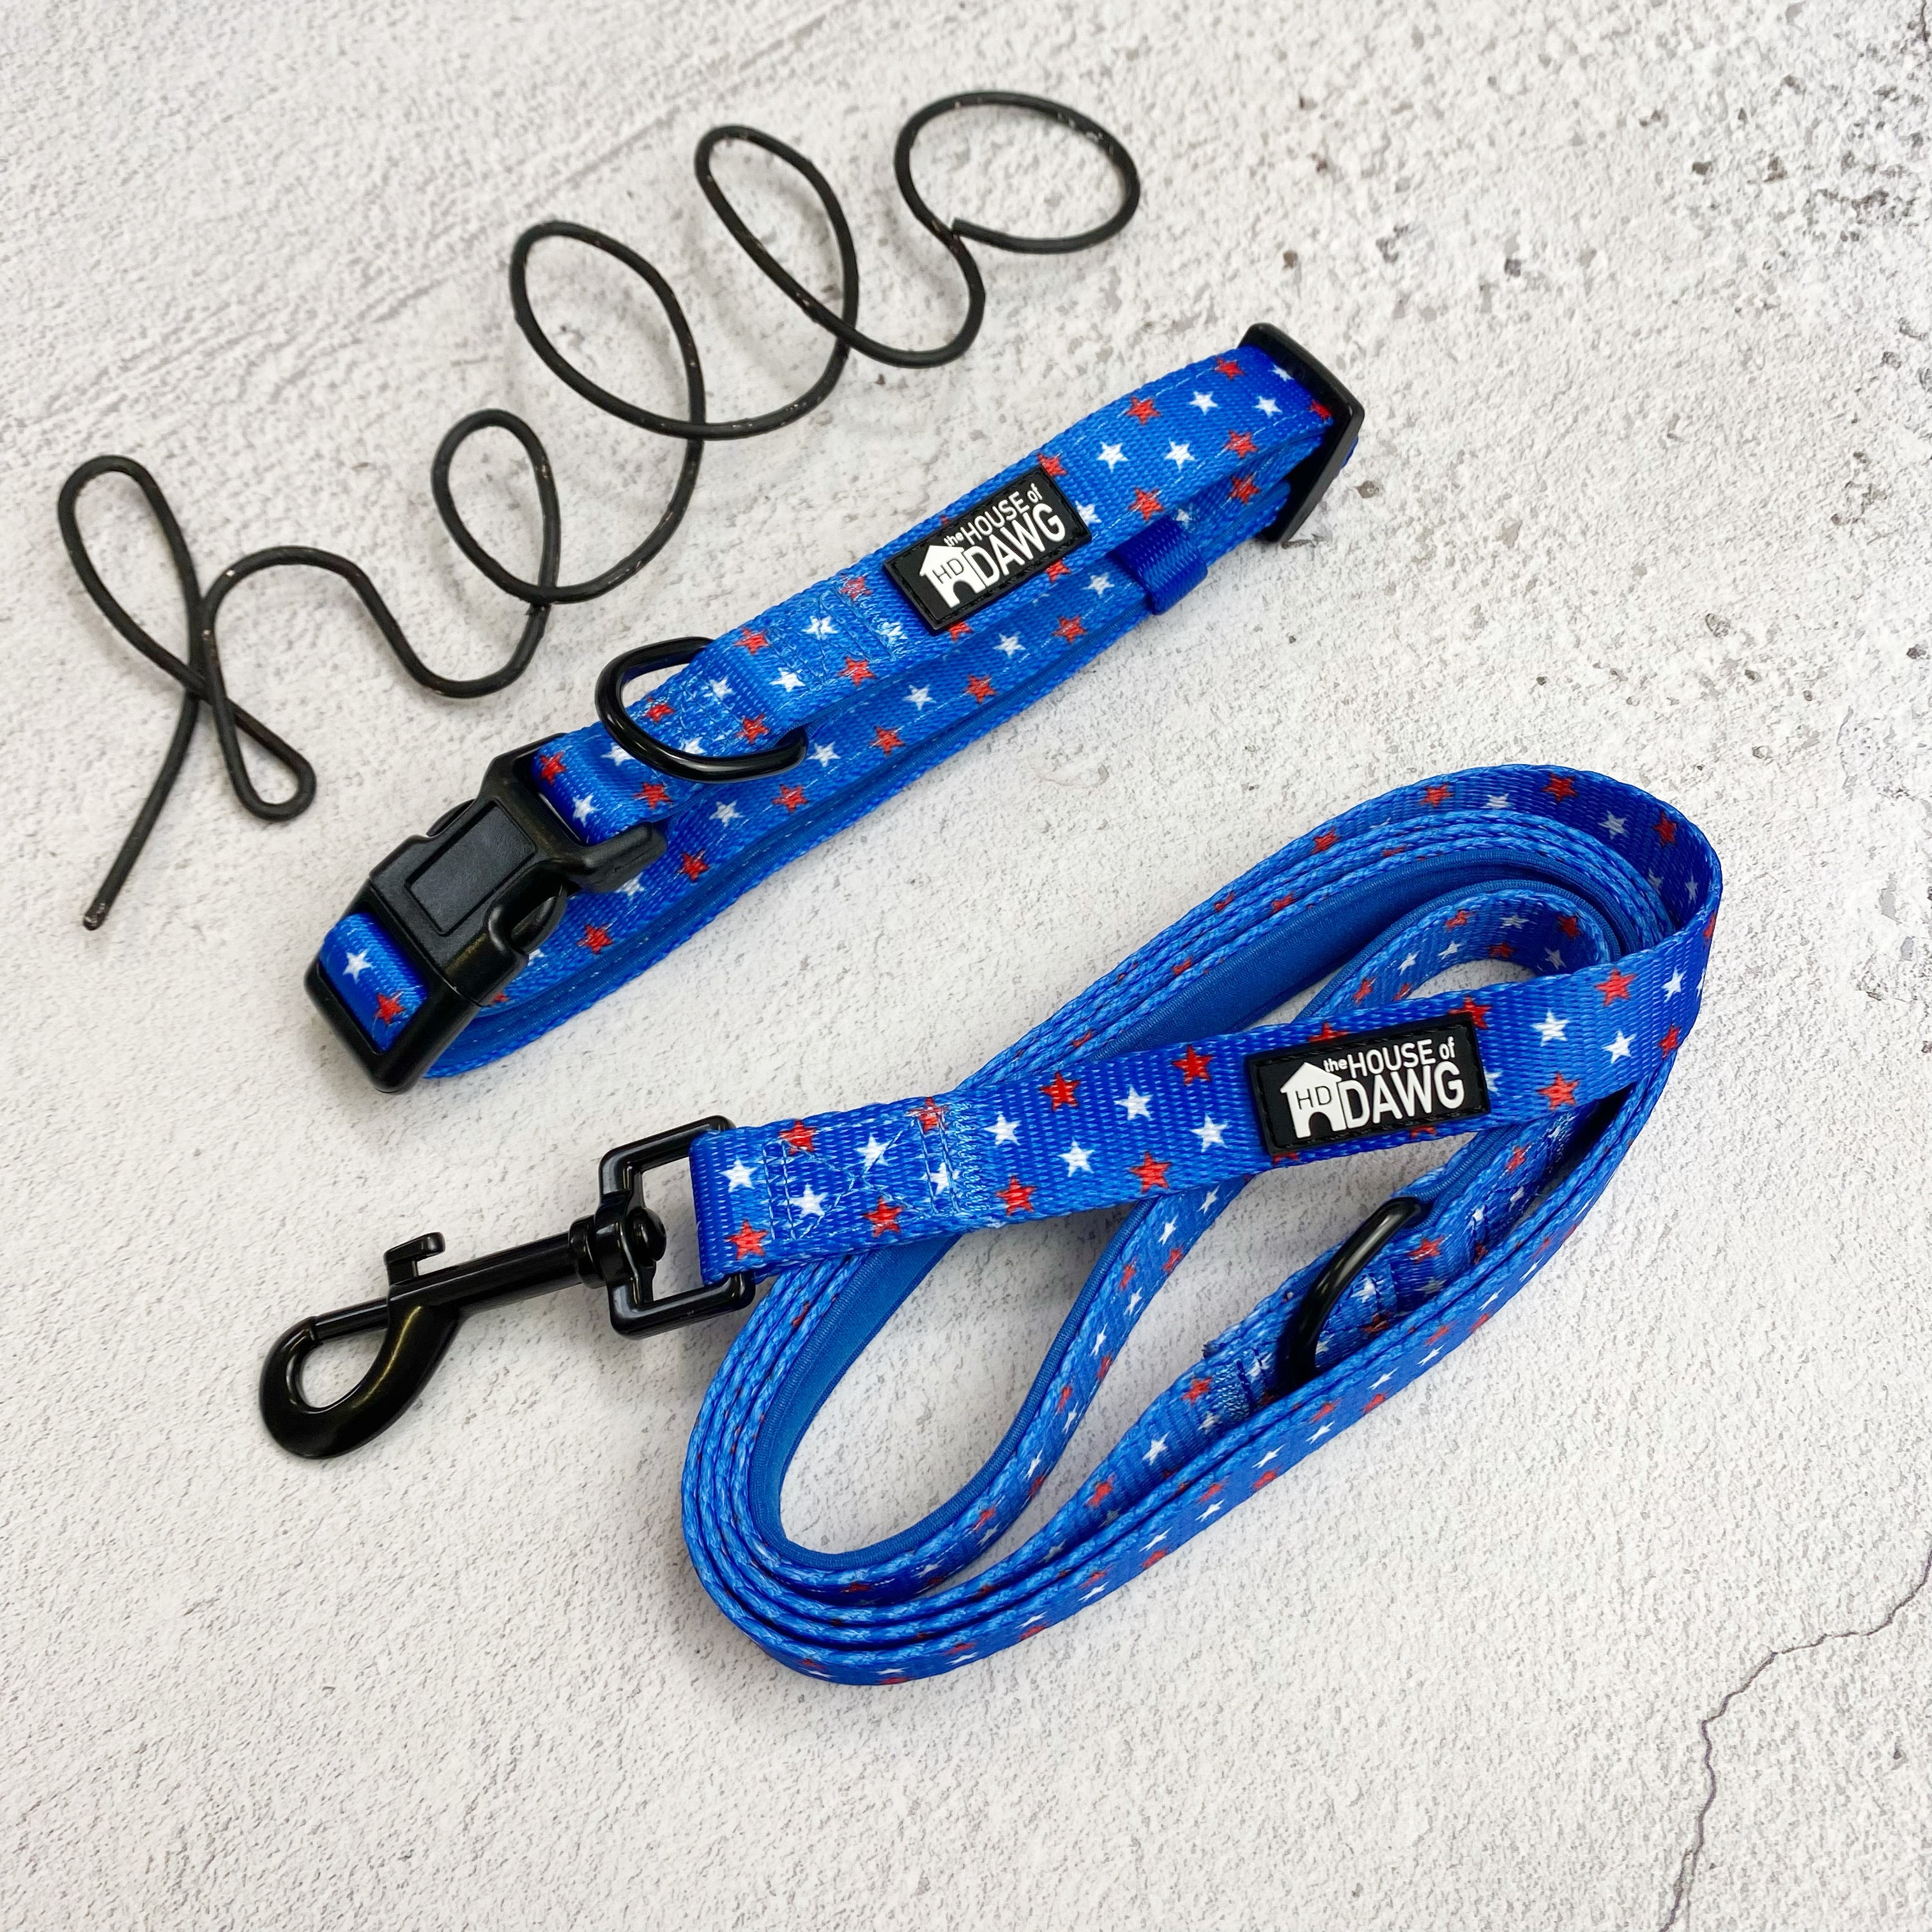 The Patriot Dog Lead and Collar